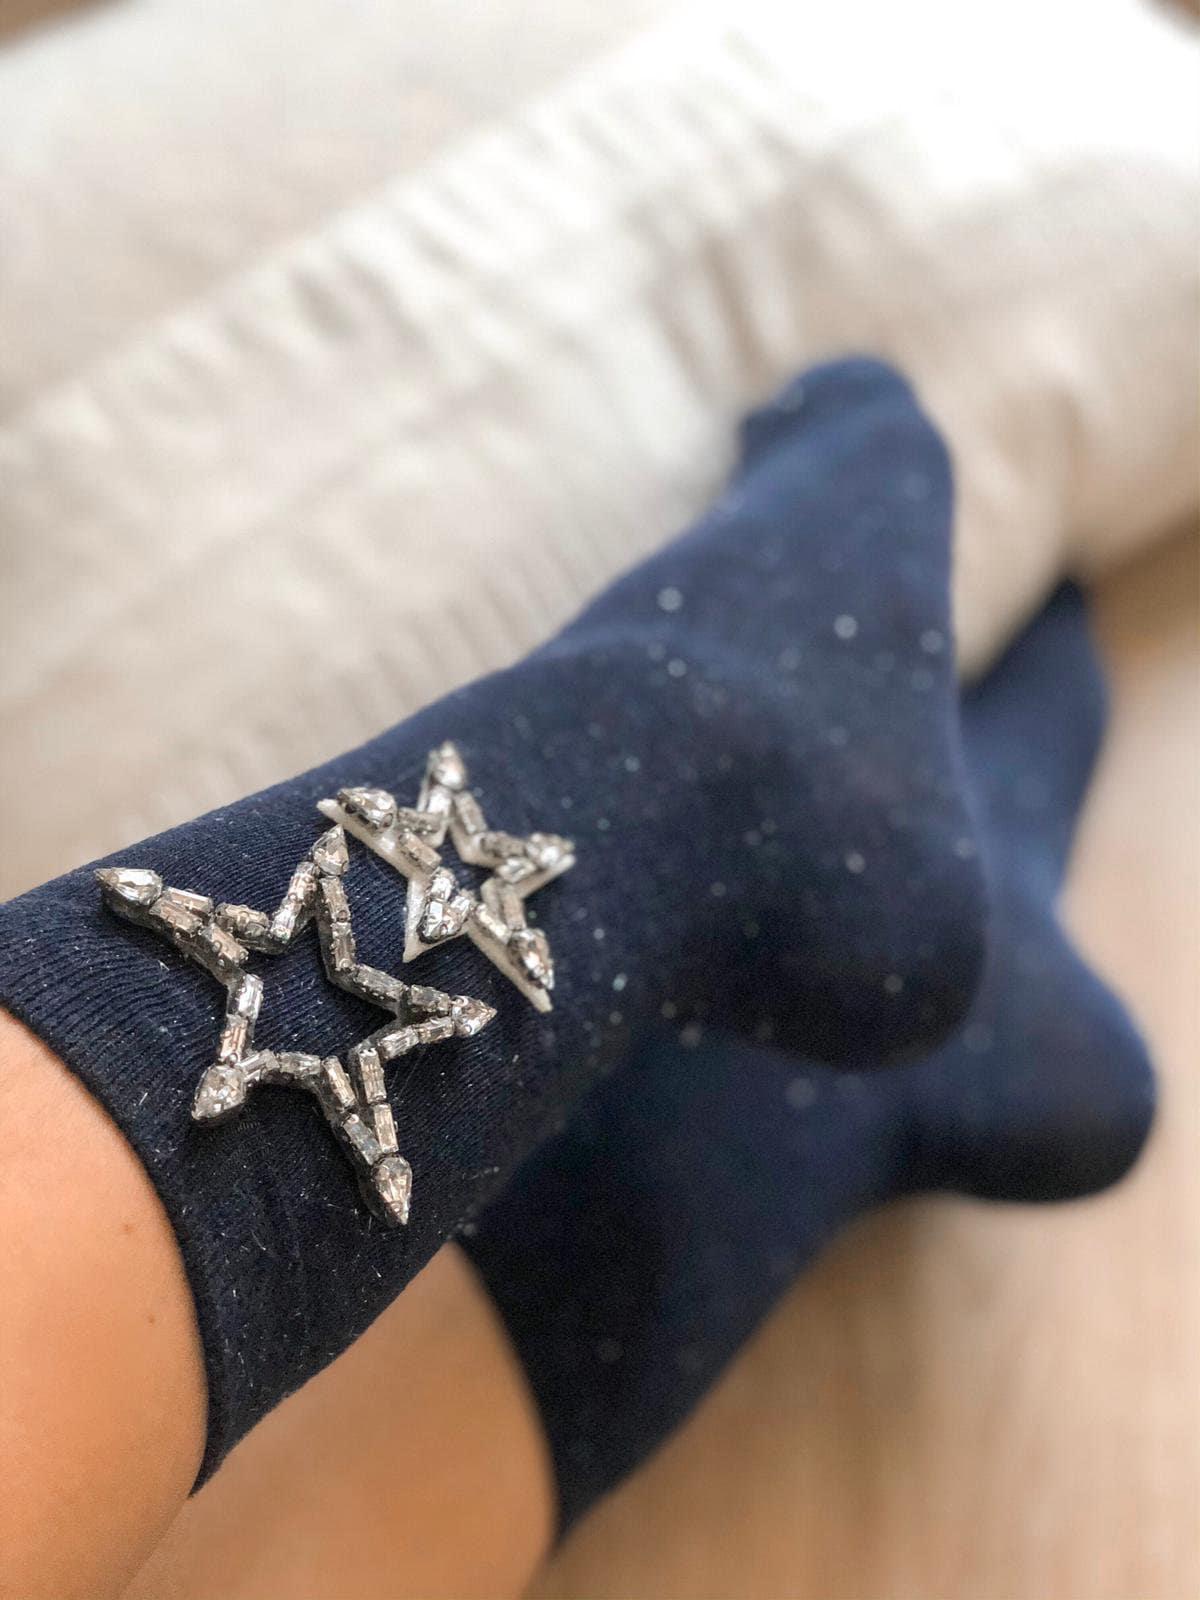 Elegant Handmade Blue Cotton Socks with 2 Star-Shaped Patches, Embellished with Sparkling Rhinestones, Perfect for Special Occasions available at Moyoni Design